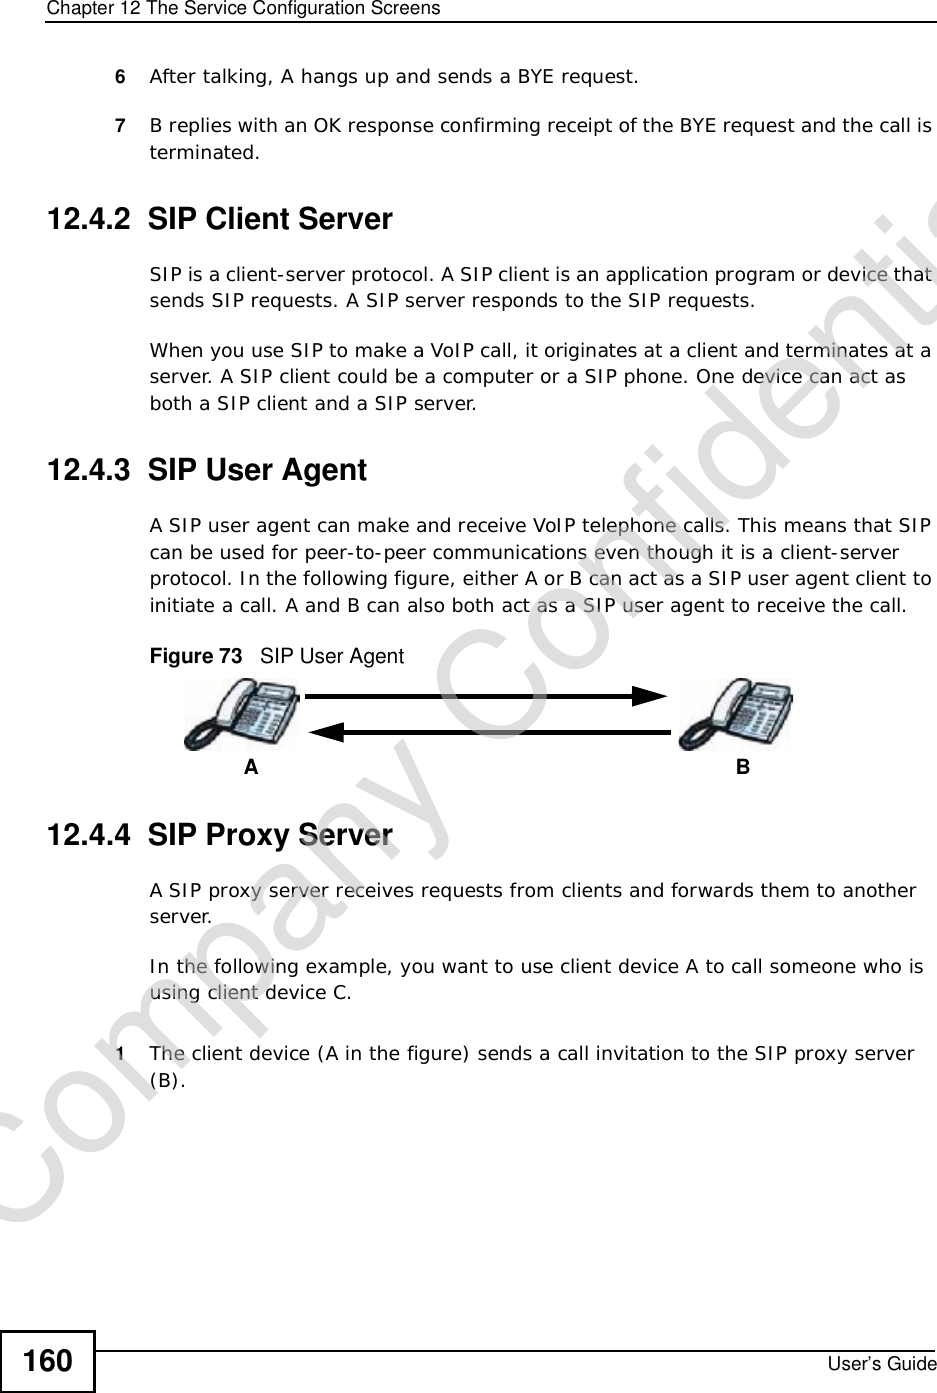 Chapter 12The Service Configuration ScreensUser’s Guide1606After talking, A hangs up and sends a BYE request. 7B replies with an OK response confirming receipt of the BYE request and the call is terminated.12.4.2  SIP Client ServerSIP is a client-server protocol. A SIP client is an application program or device that sends SIP requests. A SIP server responds to the SIP requests. When you use SIP to make a VoIP call, it originates at a client and terminates at a server. A SIP client could be a computer or a SIP phone. One device can act as both a SIP client and a SIP server. 12.4.3  SIP User Agent A SIP user agent can make and receive VoIP telephone calls. This means that SIP can be used for peer-to-peer communications even though it is a client-server protocol. In the following figure, either A or B can act as a SIP user agent client to initiate a call. A and B can also both act as a SIP user agent to receive the call.Figure 73   SIP User Agent12.4.4  SIP Proxy ServerA SIP proxy server receives requests from clients and forwards them to another server.In the following example, you want to use client device A to call someone who is using client device C. 1The client device (A in the figure) sends a call invitation to the SIP proxy server (B).ABCompany Confidential